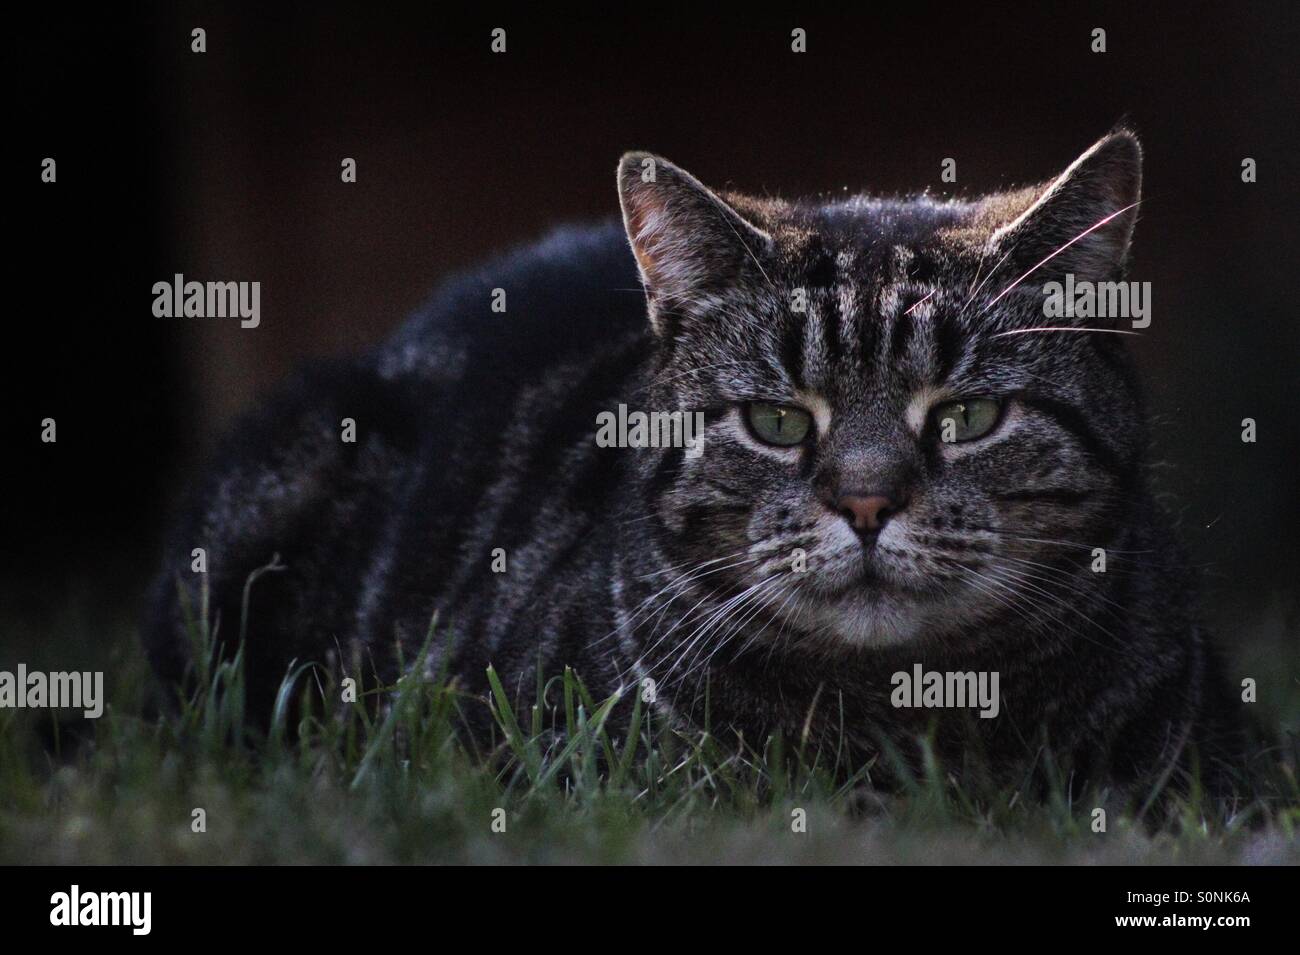 Cat laying on grass Stock Photo